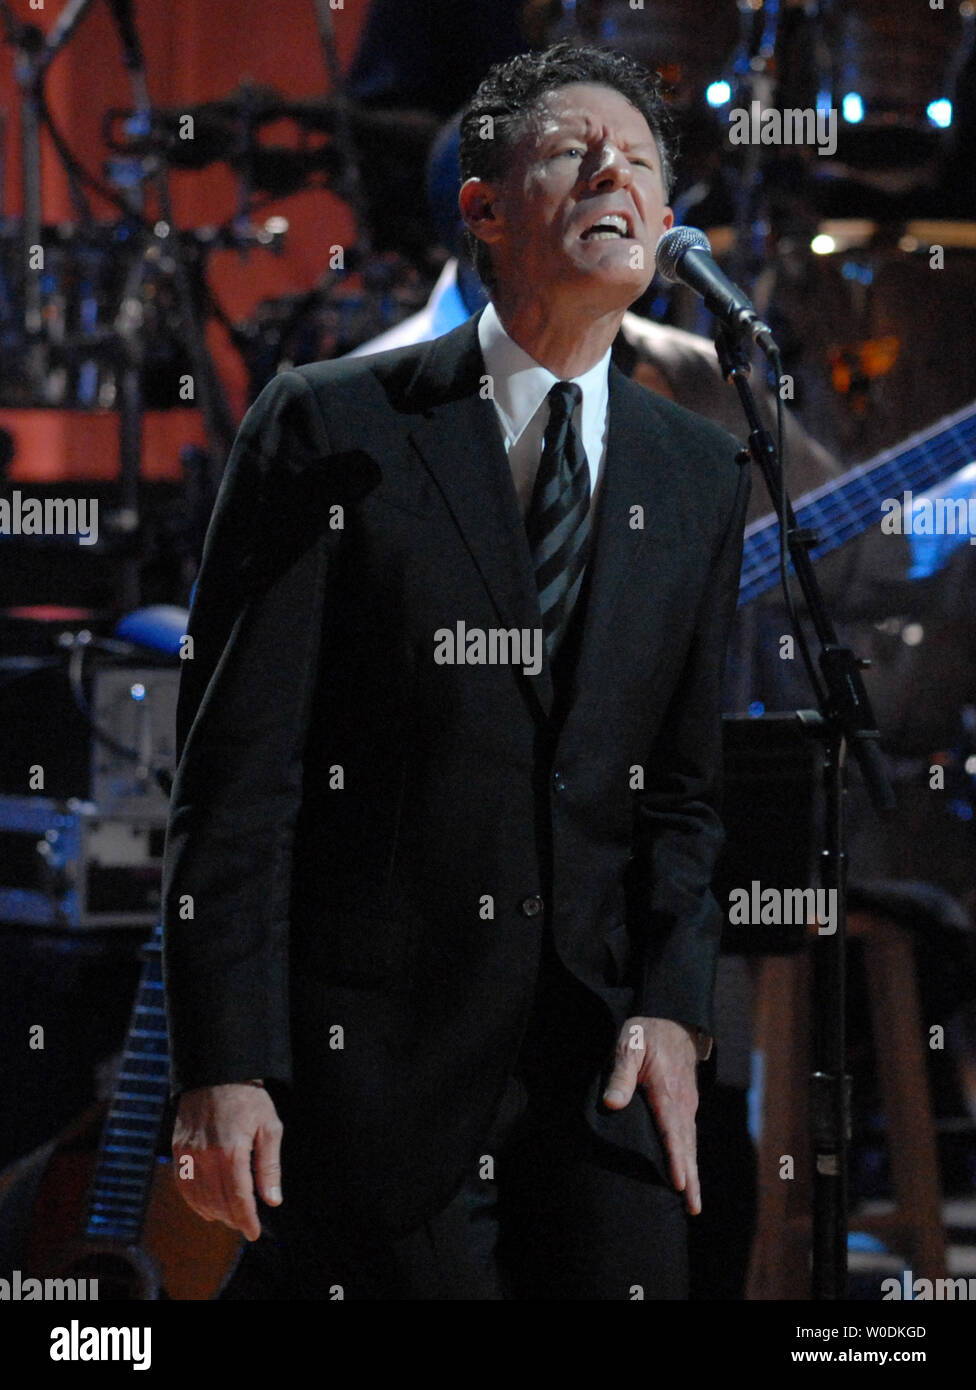 Lyle Lovett performs during a concert celebrating  the music of Paul Simon, recipient of the first Library of Congress Gershwin Prize for Popular Song, at the Warner Theater in Washington on May 23, 2007.  (UPI Photo/Alexis C. Glenn) Stock Photo